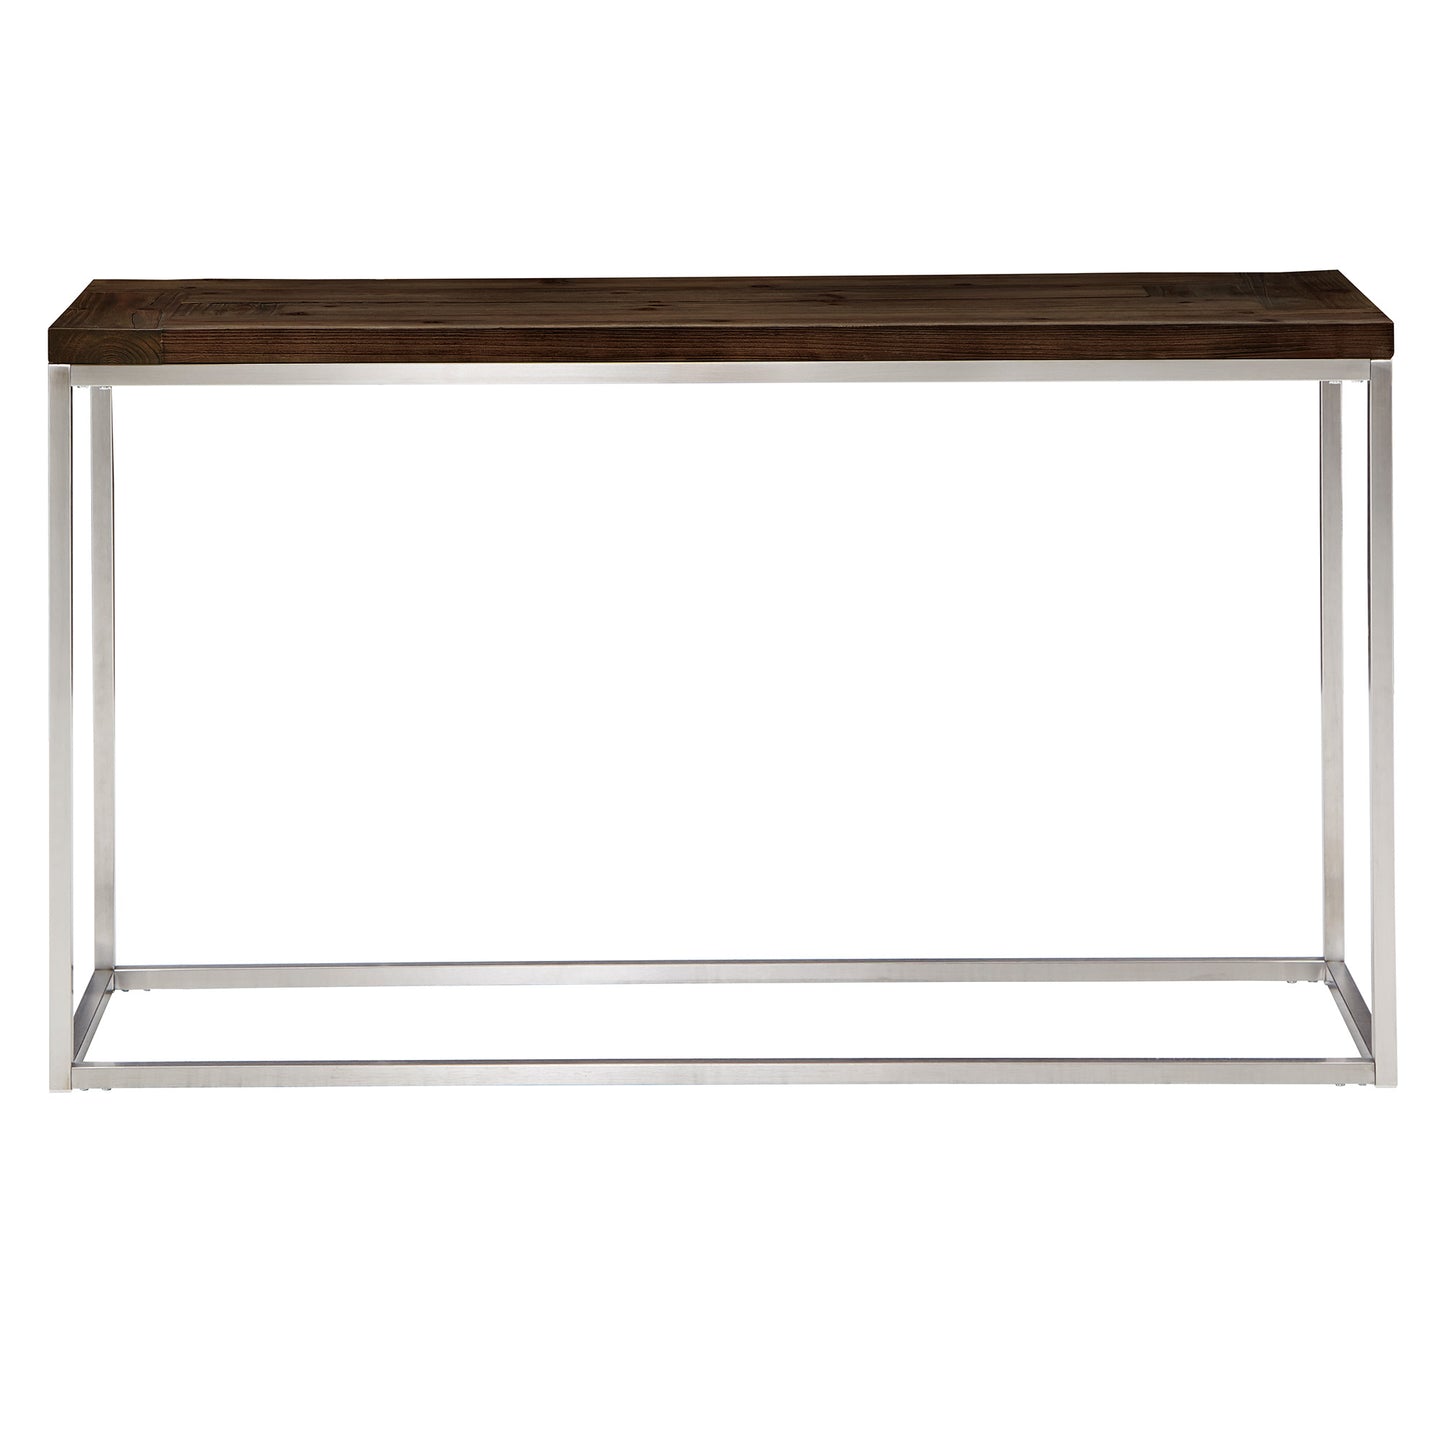 Local Pickup Only - Stainless Steel Rectangular Sofa Table - Brown Finish